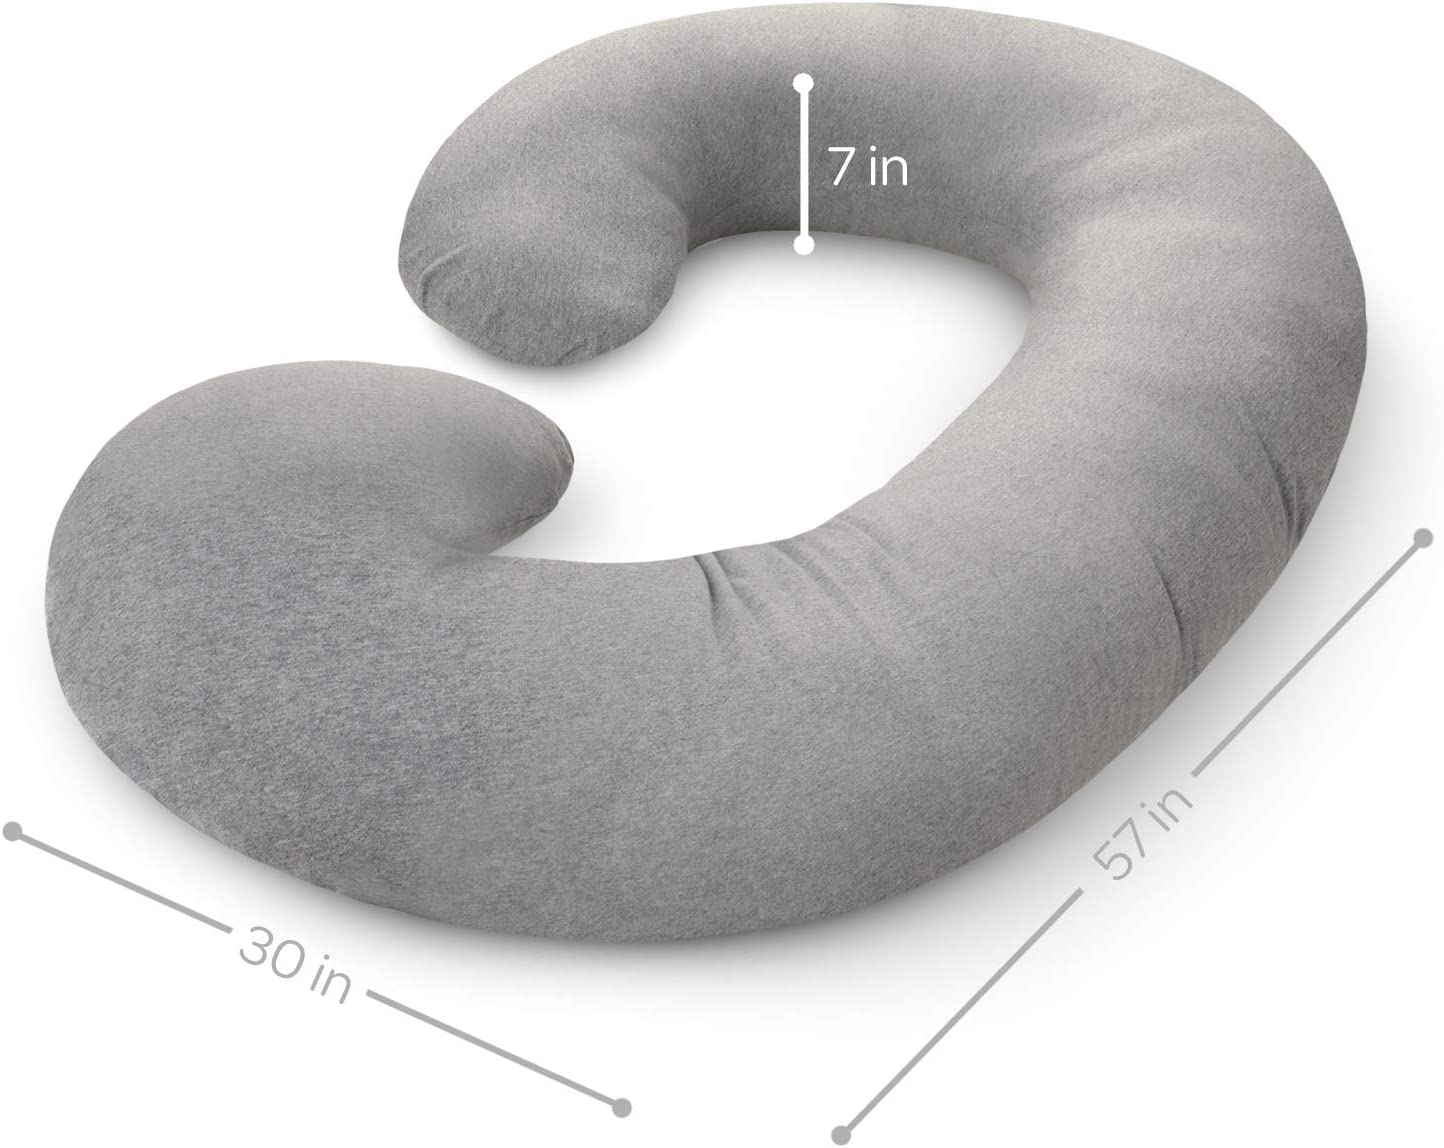 PharMeDoc Pregnancy Pillow - C-Shaped Body Pillow for Pregnant Women - Jersey Cover, Gray - image 5 of 8